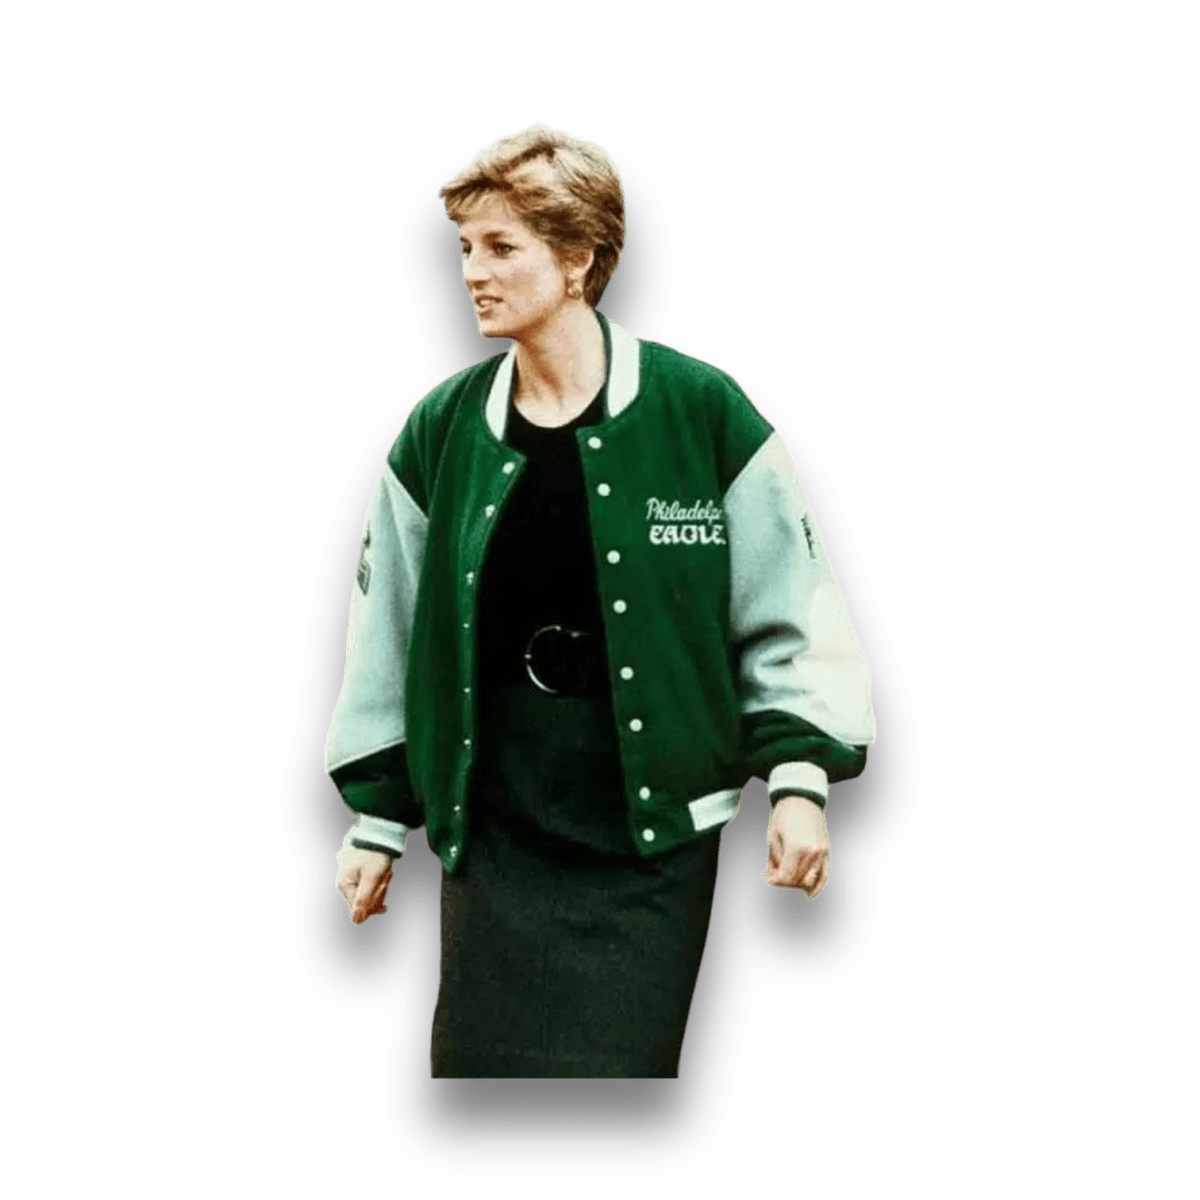 Mitchell & Ness “Princess Diana” Varsity Eagles Jacket - sneaker - Outerwear - Mitchell & Ness - Jawns on Fire